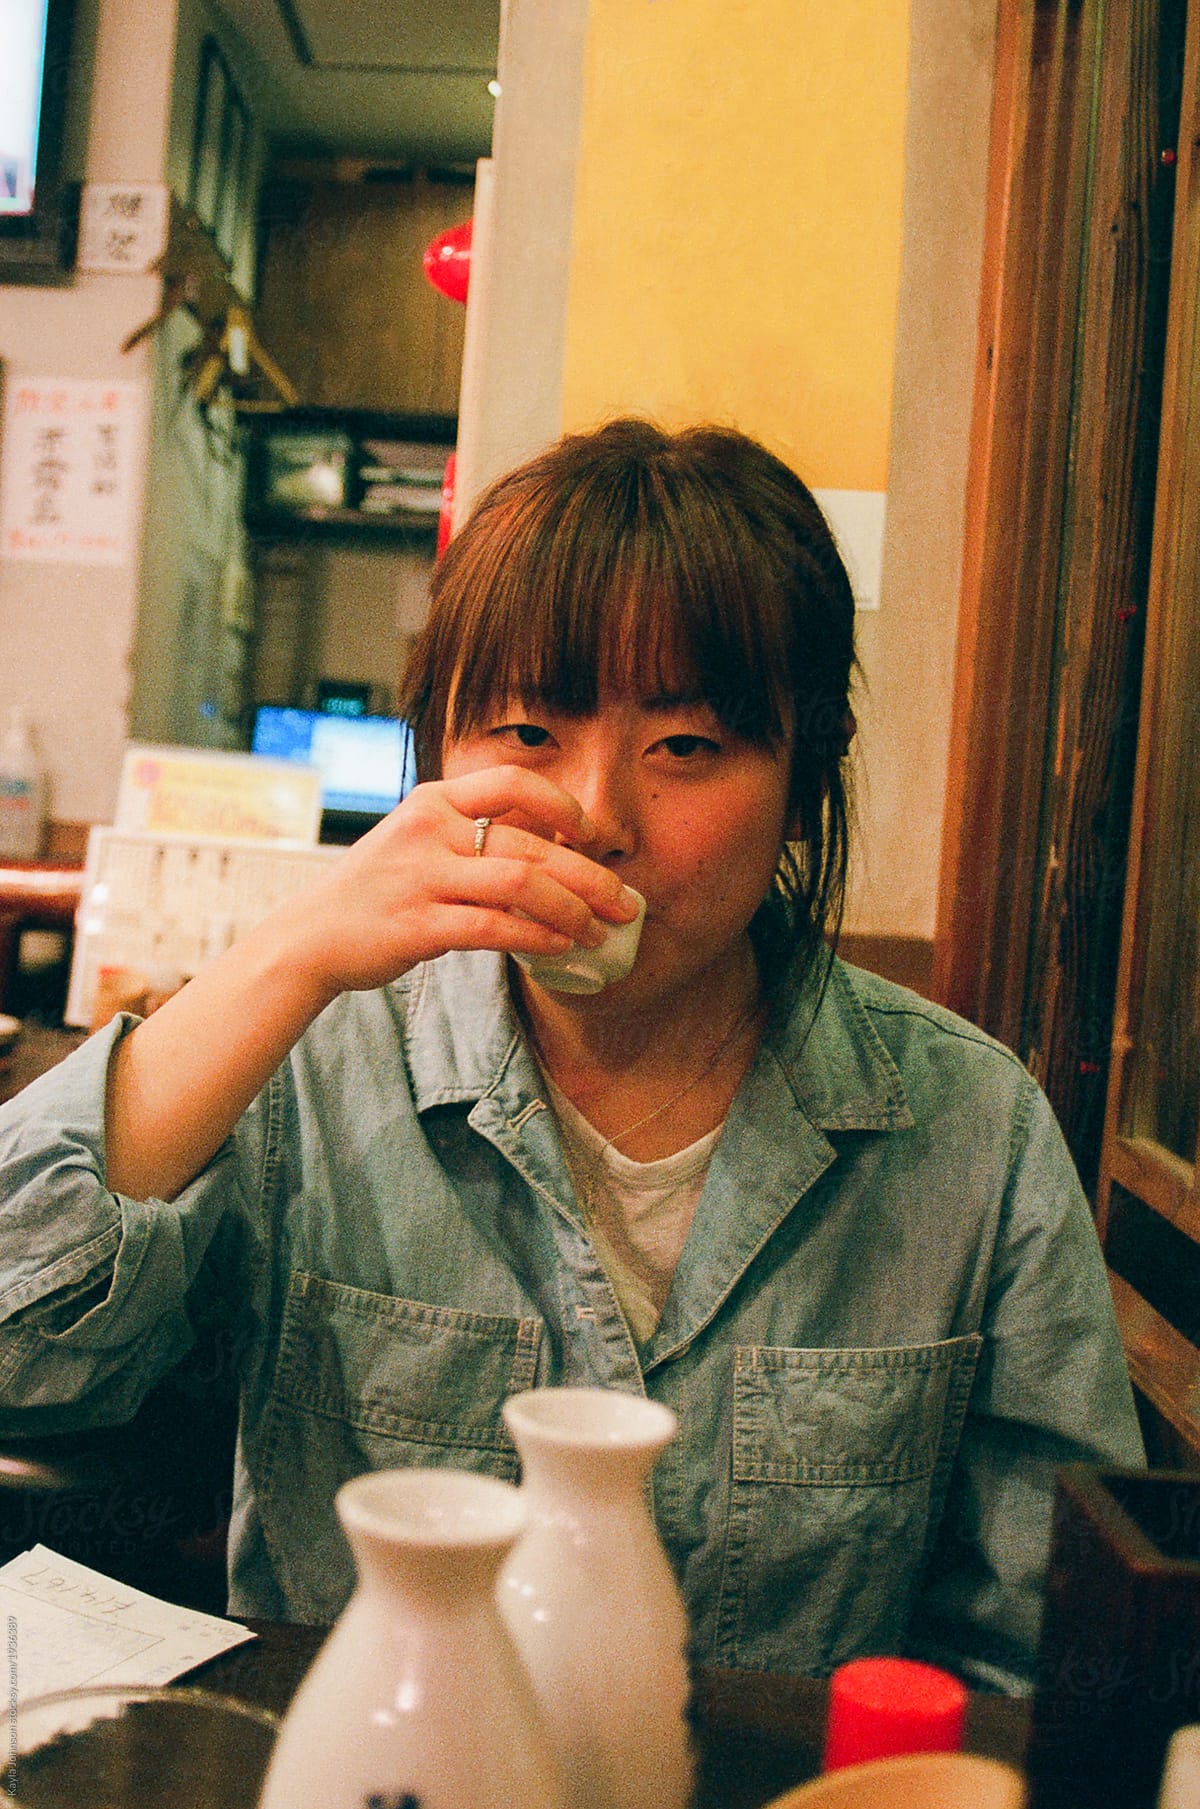 Sultry Japanese woman drunkenly sipping sake